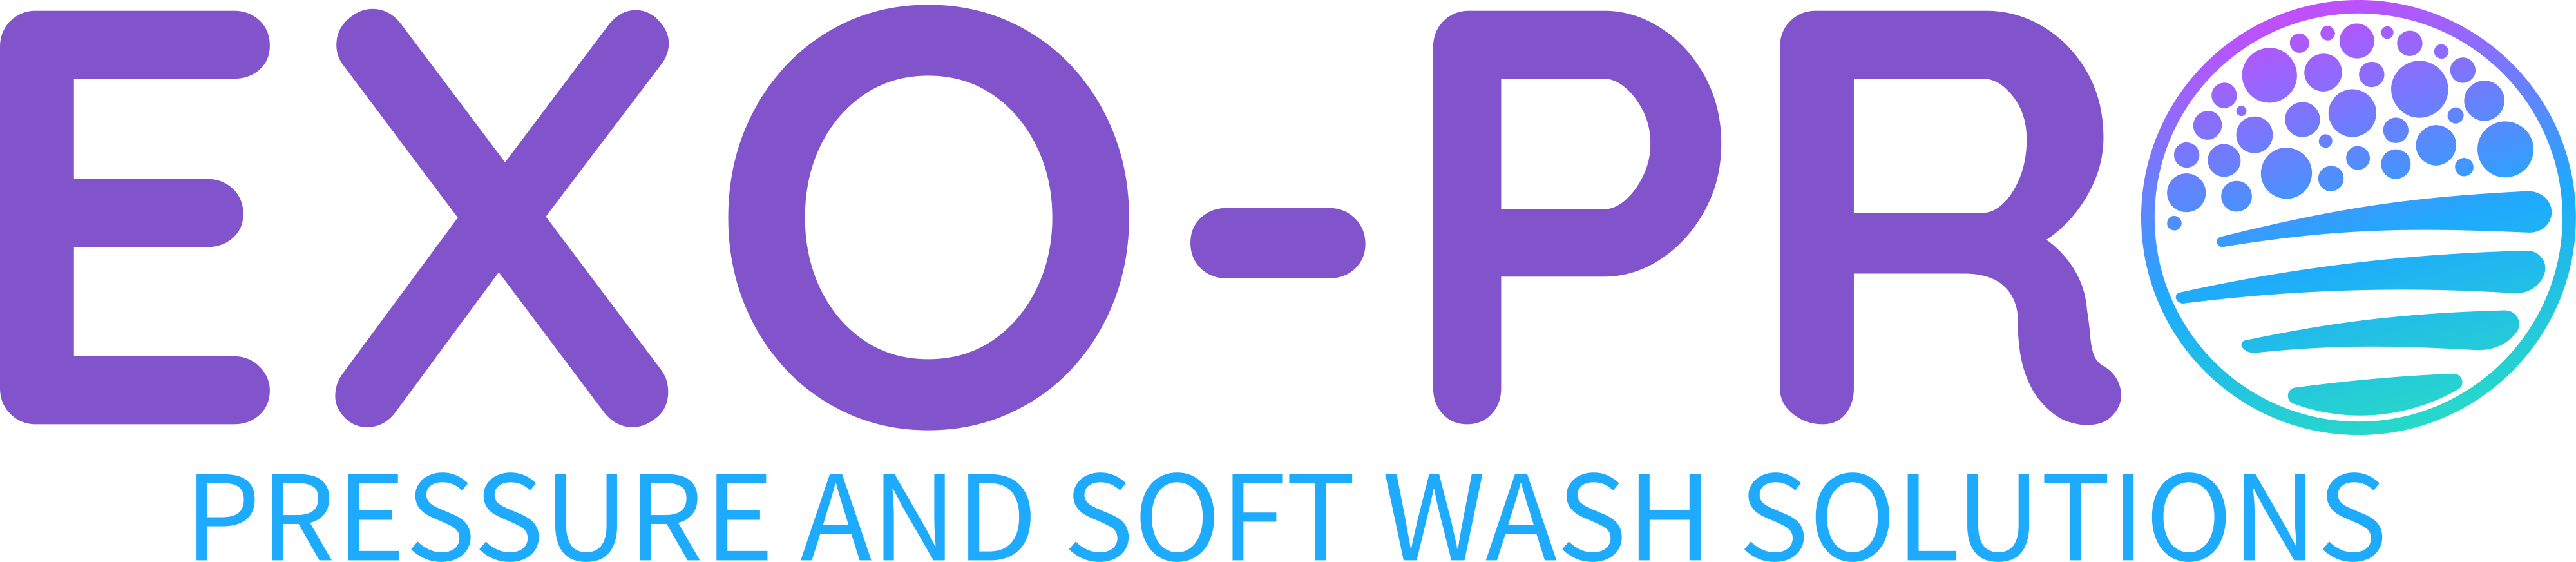 Exo-Pro Pressure and Soft Wash Solutions Logo